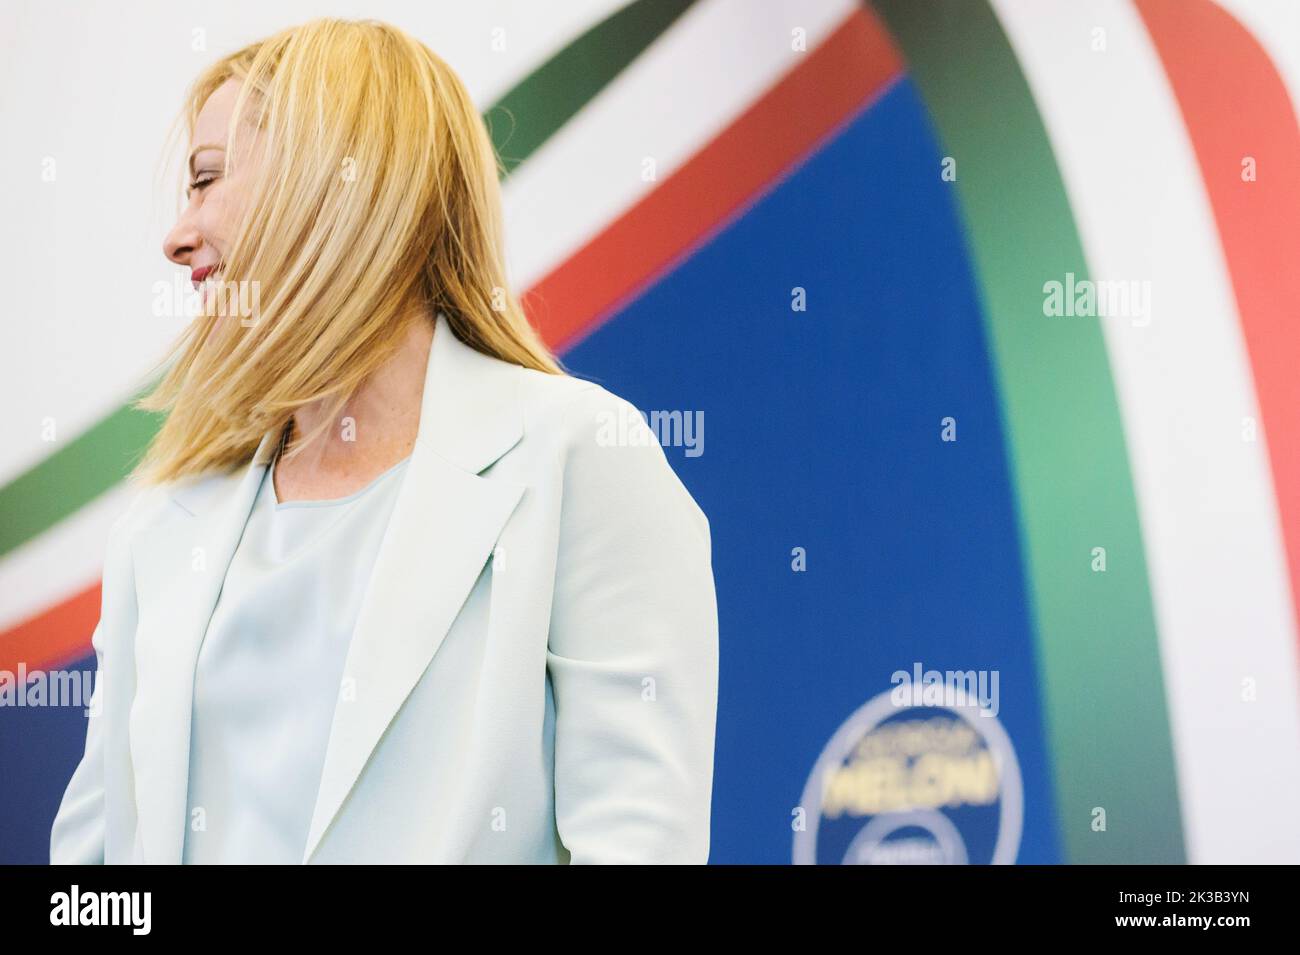 Rome, Italy. 26th Sep, 2022. Giorgia Meloni seen during a press conference. Giorgia Meloni, leader of the far right and national-conservative party Fratelli díItalia (Brothers of Italy), commented the victory of the party at the Italian elections, held on 25 September 2022, at Parco Principi Hotel in Rome. (Photo by Valeria Ferraro/SOPA Images/Sipa USA) Credit: Sipa USA/Alamy Live News Stock Photo